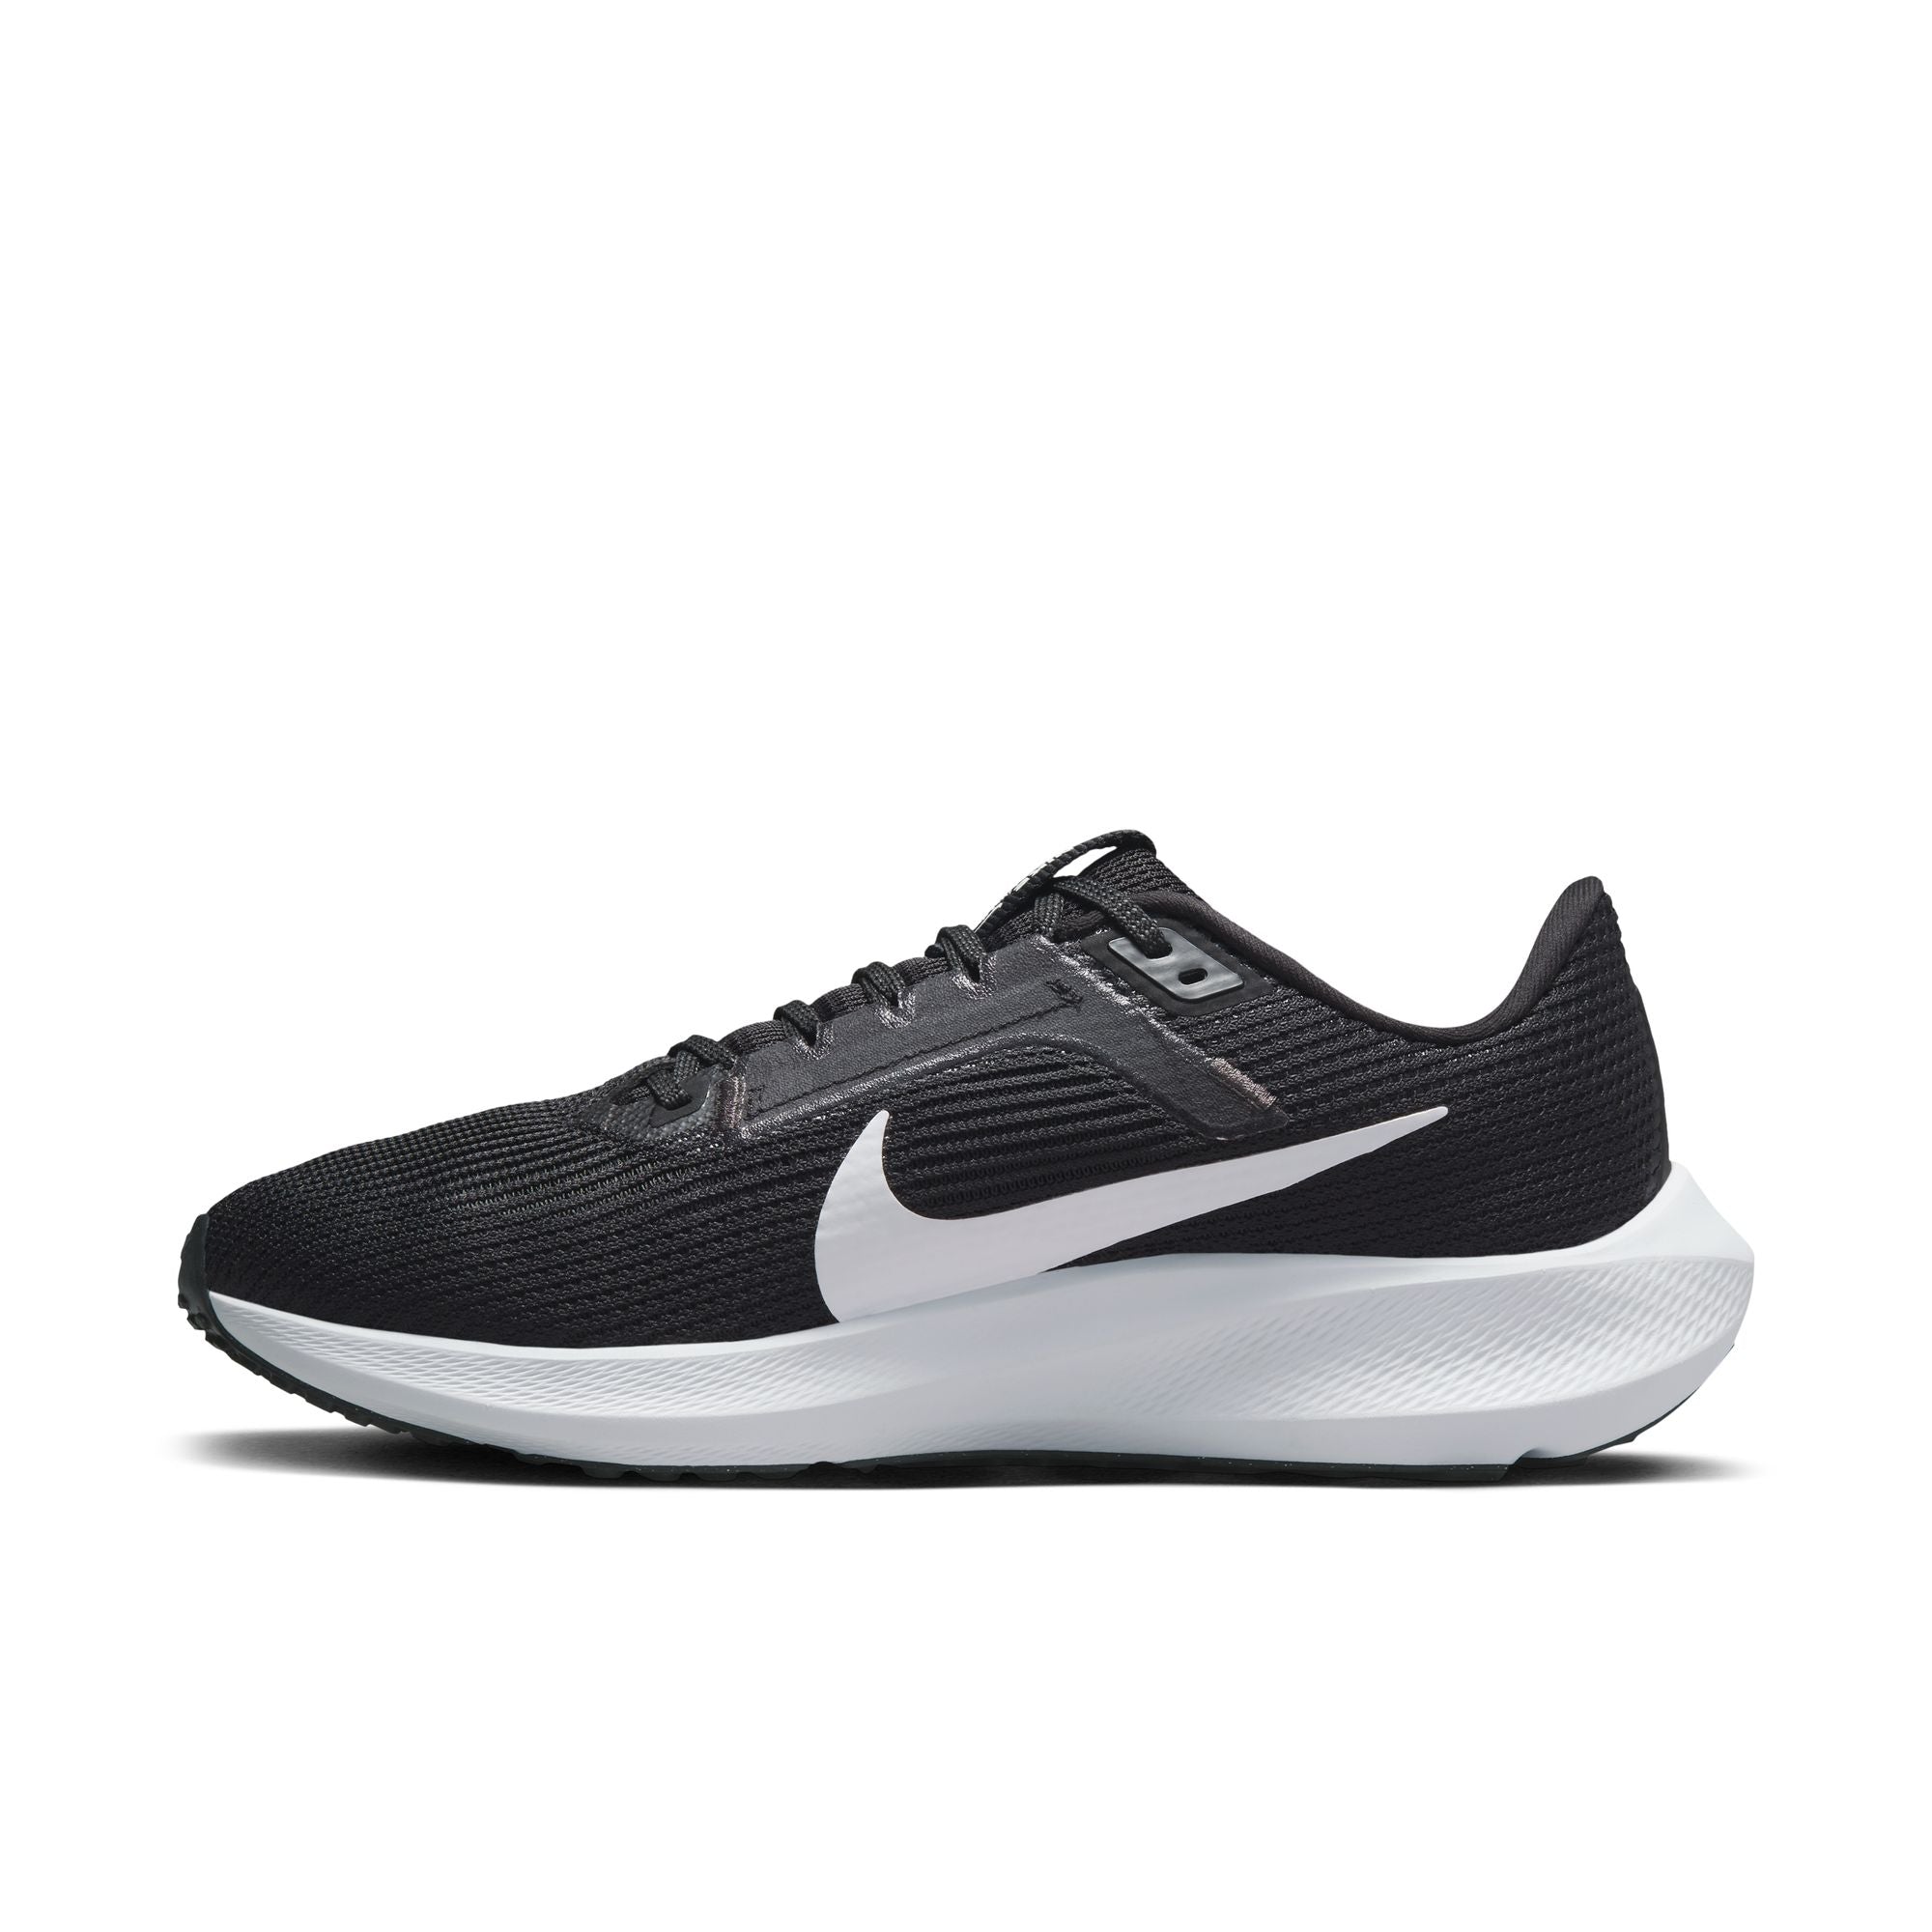 WOMEN'S NIKE PEGASUS 40 | Performance Running Outfitters